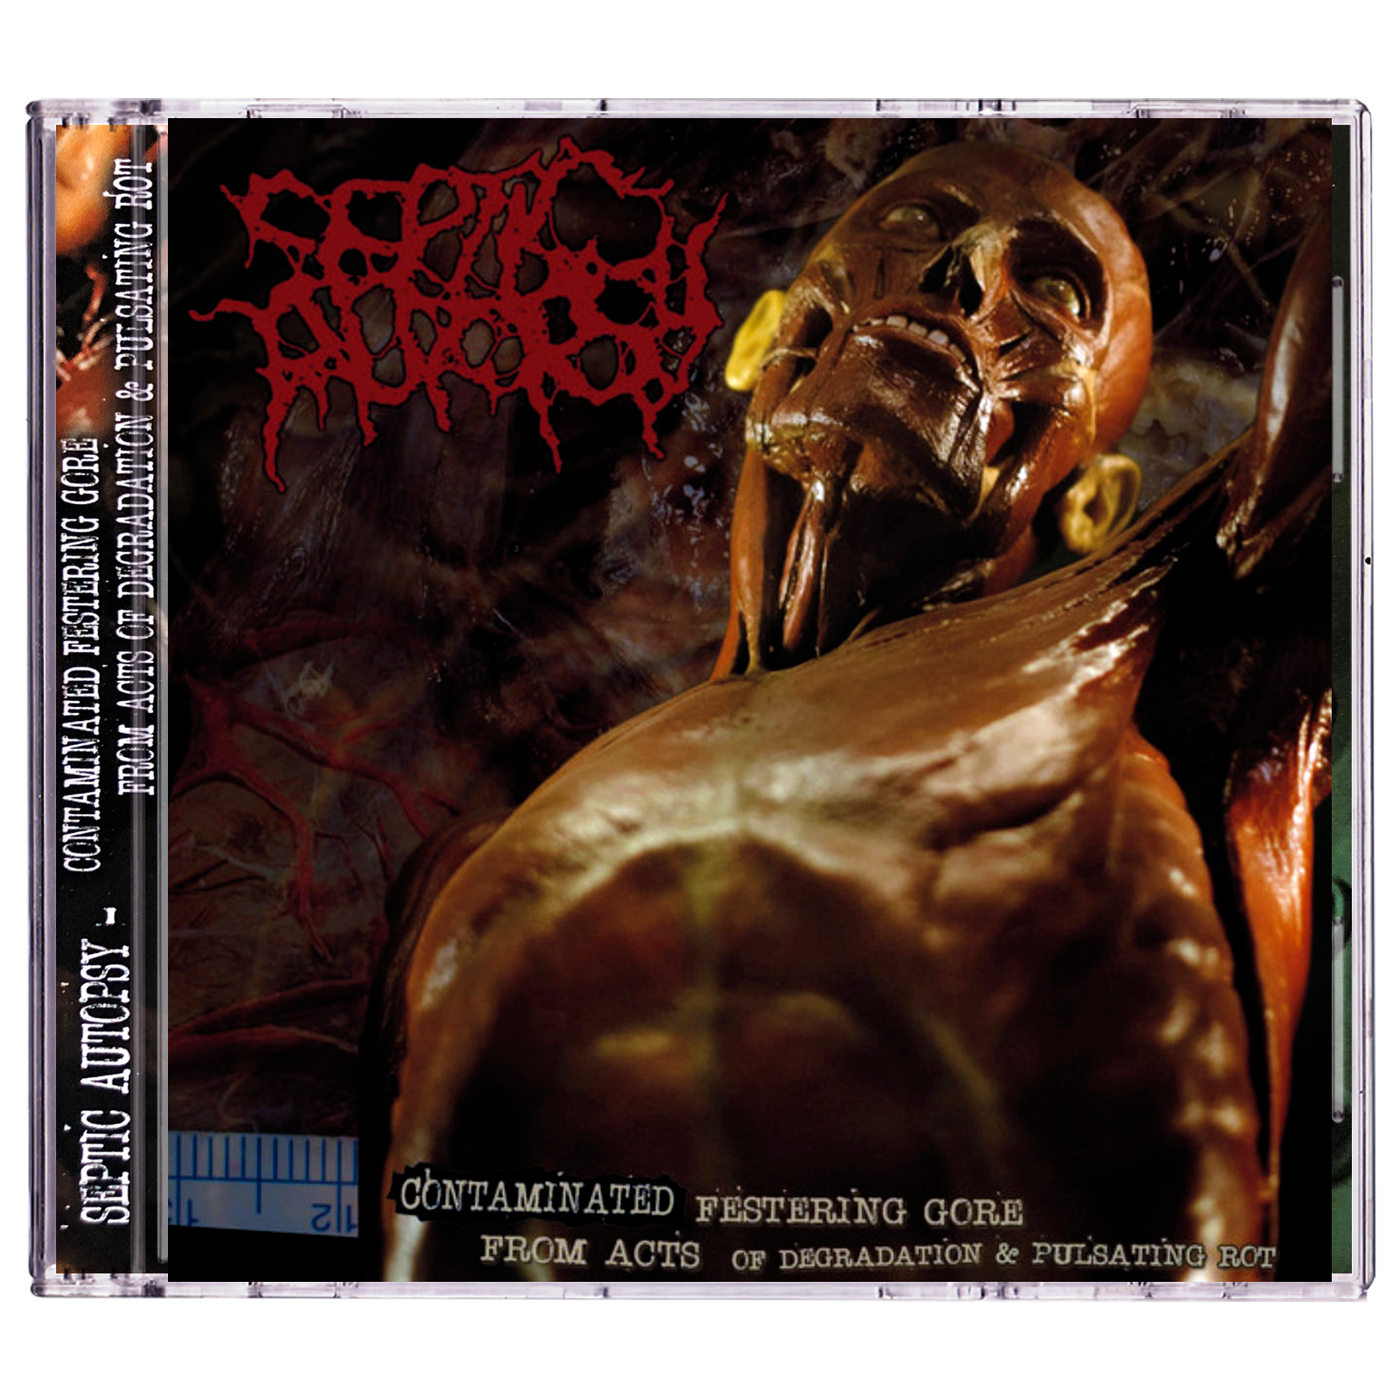 Septic Autopsy 'Contaminated Festering Gore From Acts of Degradation & Pulsating Rot' CD